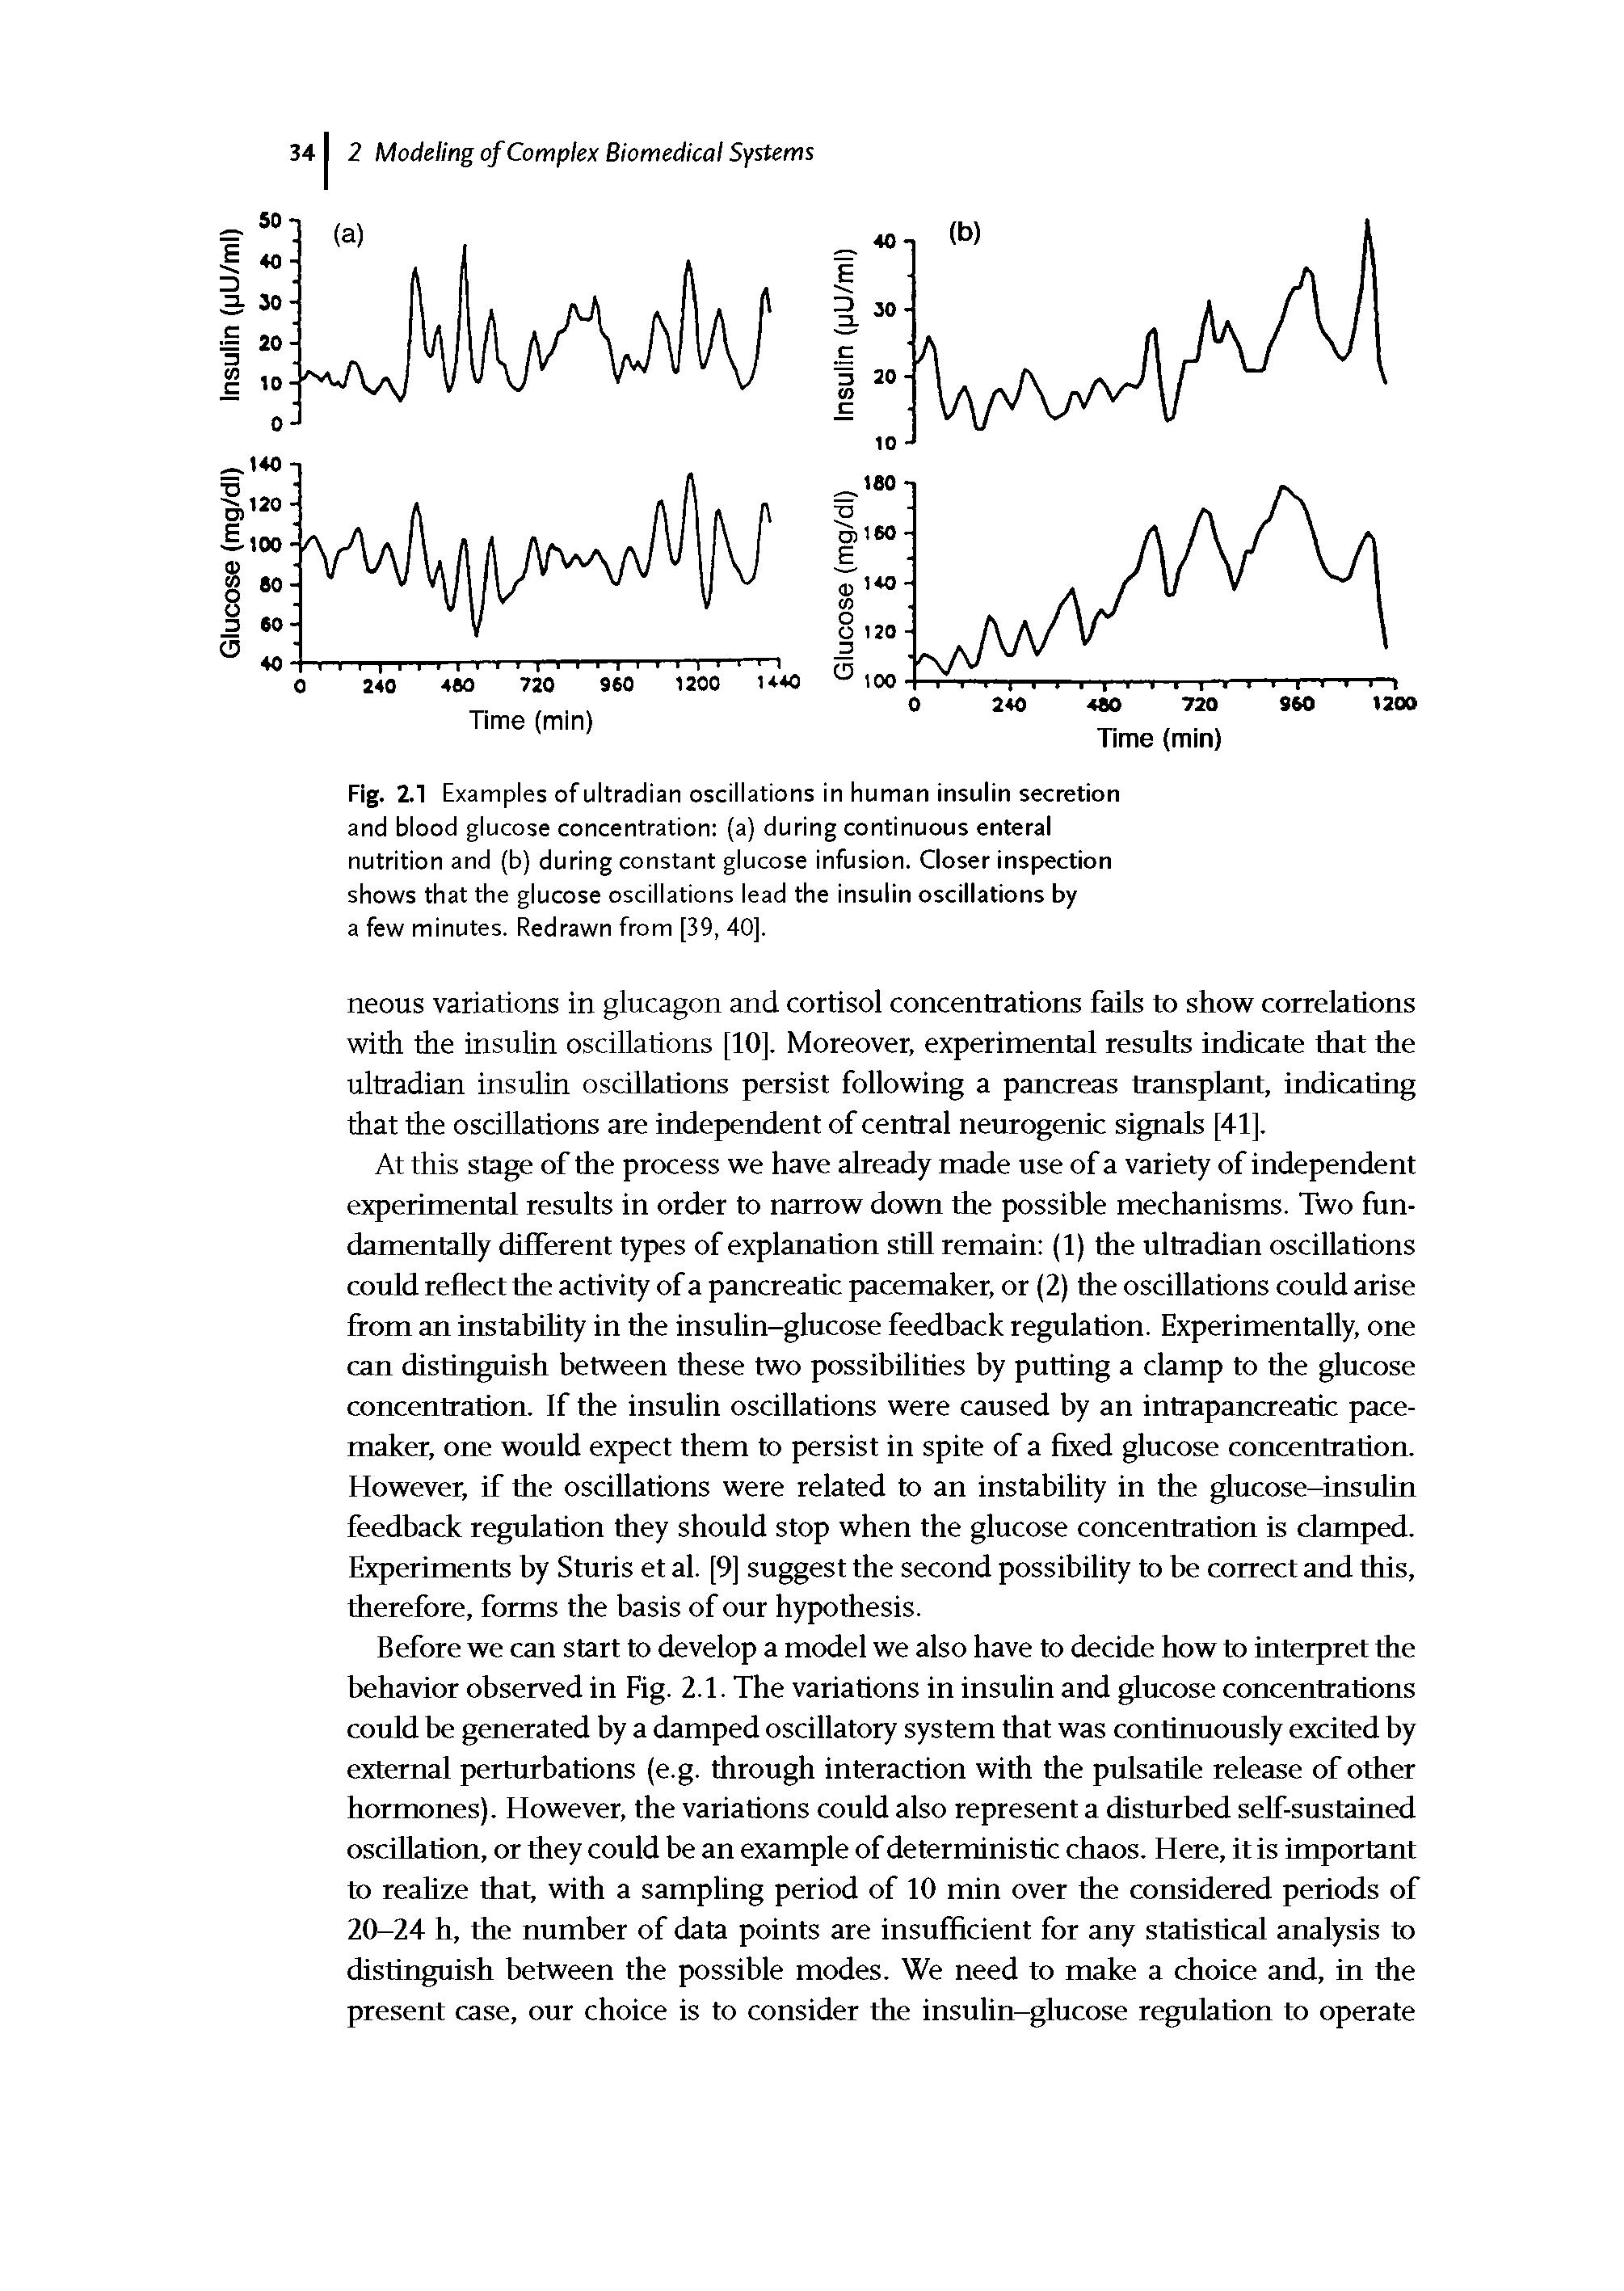 Fig. 2.1 Examples of ultradian oscillations in human insulin secretion and blood glucose concentration (a) during continuous enteral nutrition and (b) during constant glucose infusion. Closer inspection shows that the glucose oscillations lead the insulin oscillations by a few minutes. Redrawn from [39, 40].